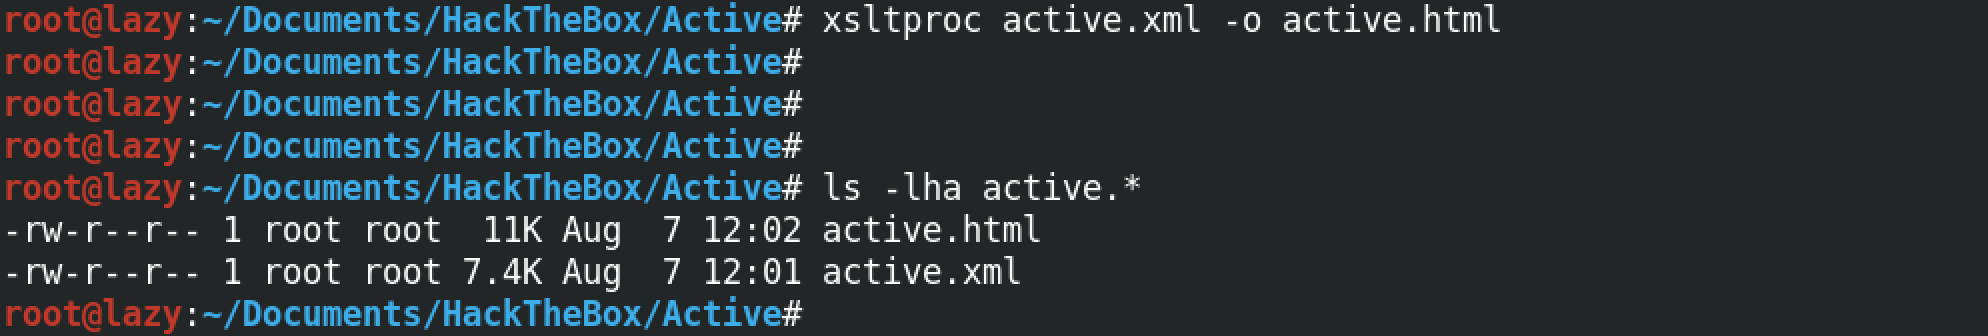 Converting the XML file to HTML file.